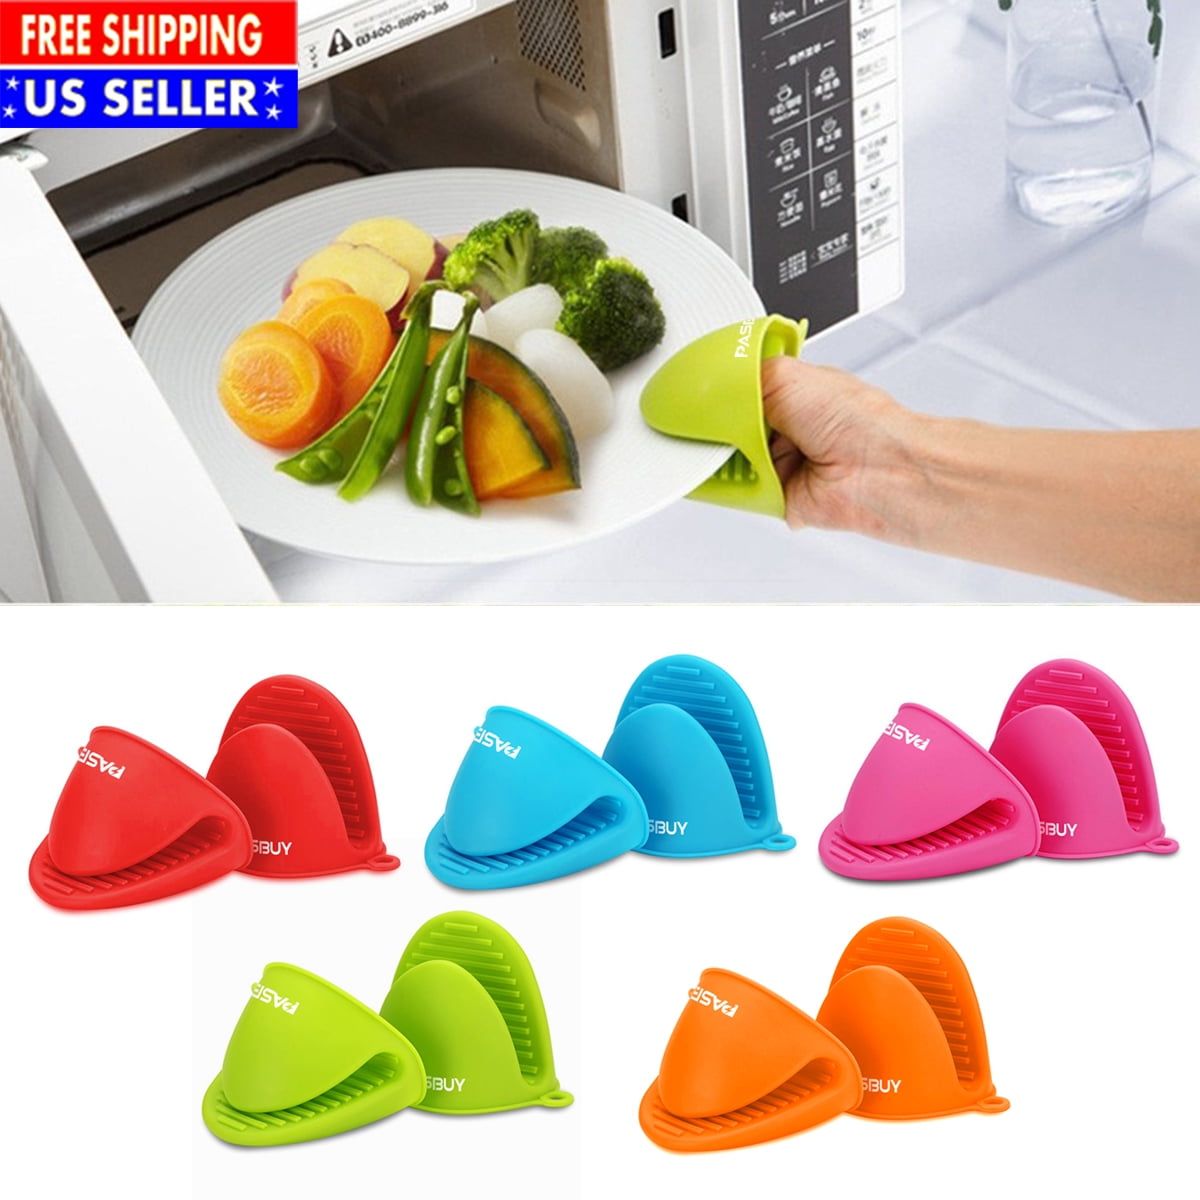 2pcs Mini Silicone Oven Mitts Heat Insulation Oven Gloves Cooking Mitts ...